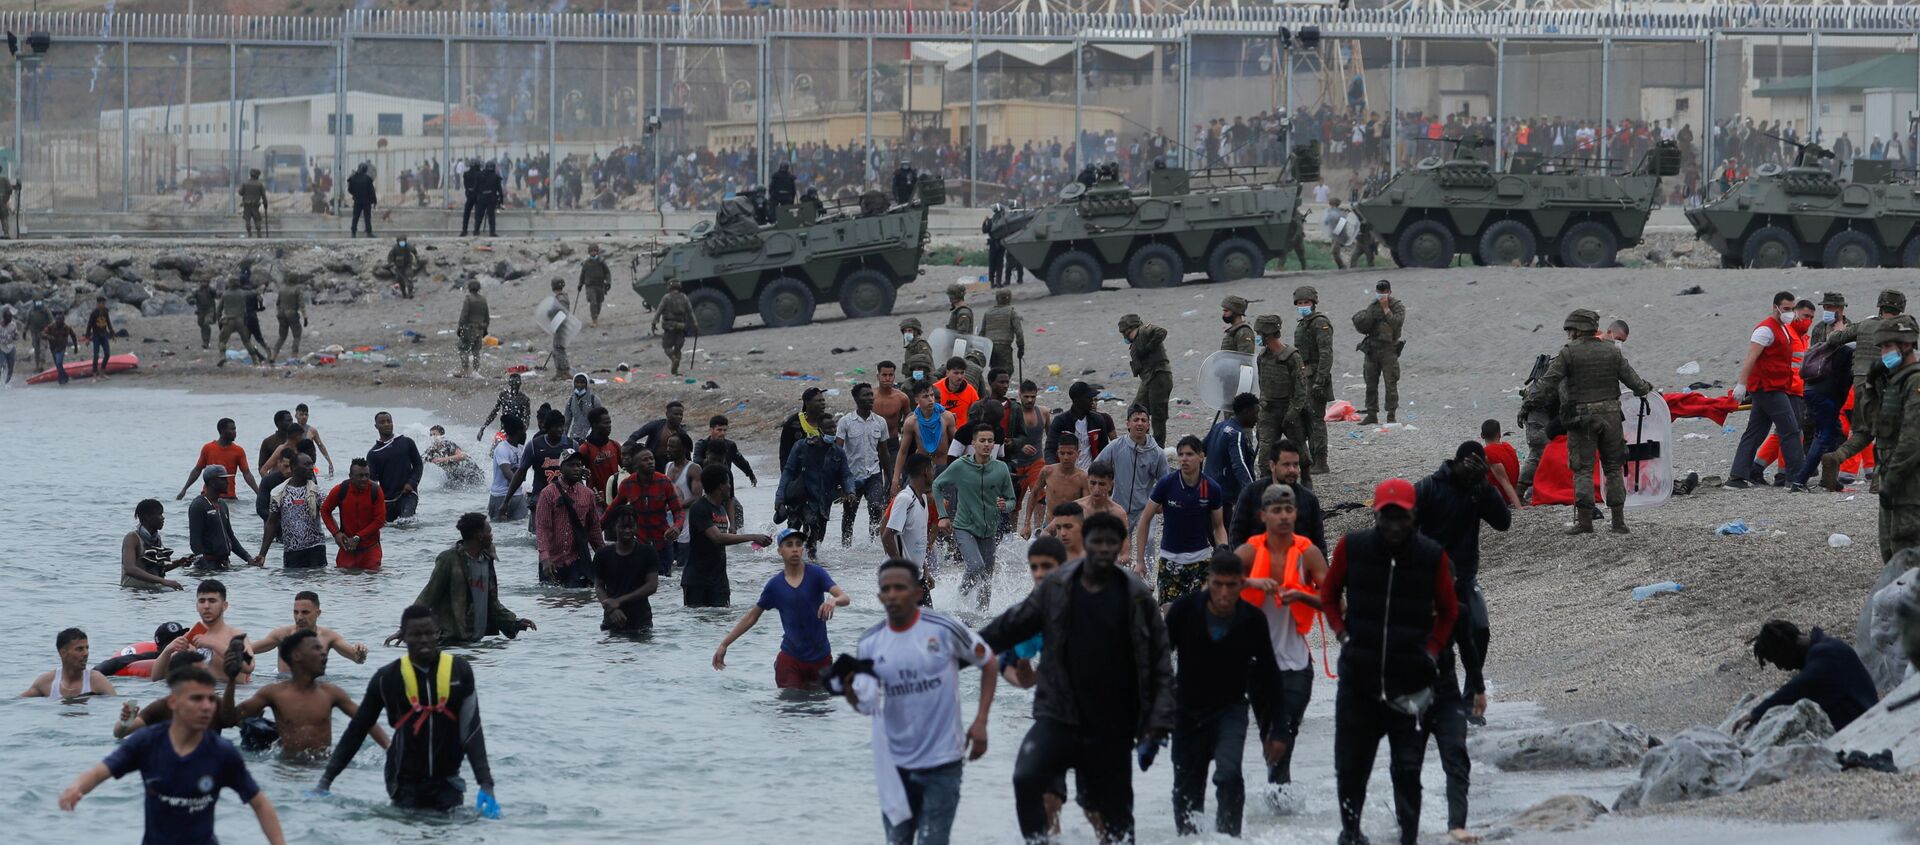 Moroccan citizens walk in the water as Spanish legionnaires patrol the area near the fence on a beach in El Tarajal, after thousands swam across the Spanish-Moroccan border on Monday, in Ceuta, Spain, May 18, 2021. REUTERS/Jon Nazca - Sputnik International, 1920, 18.05.2021